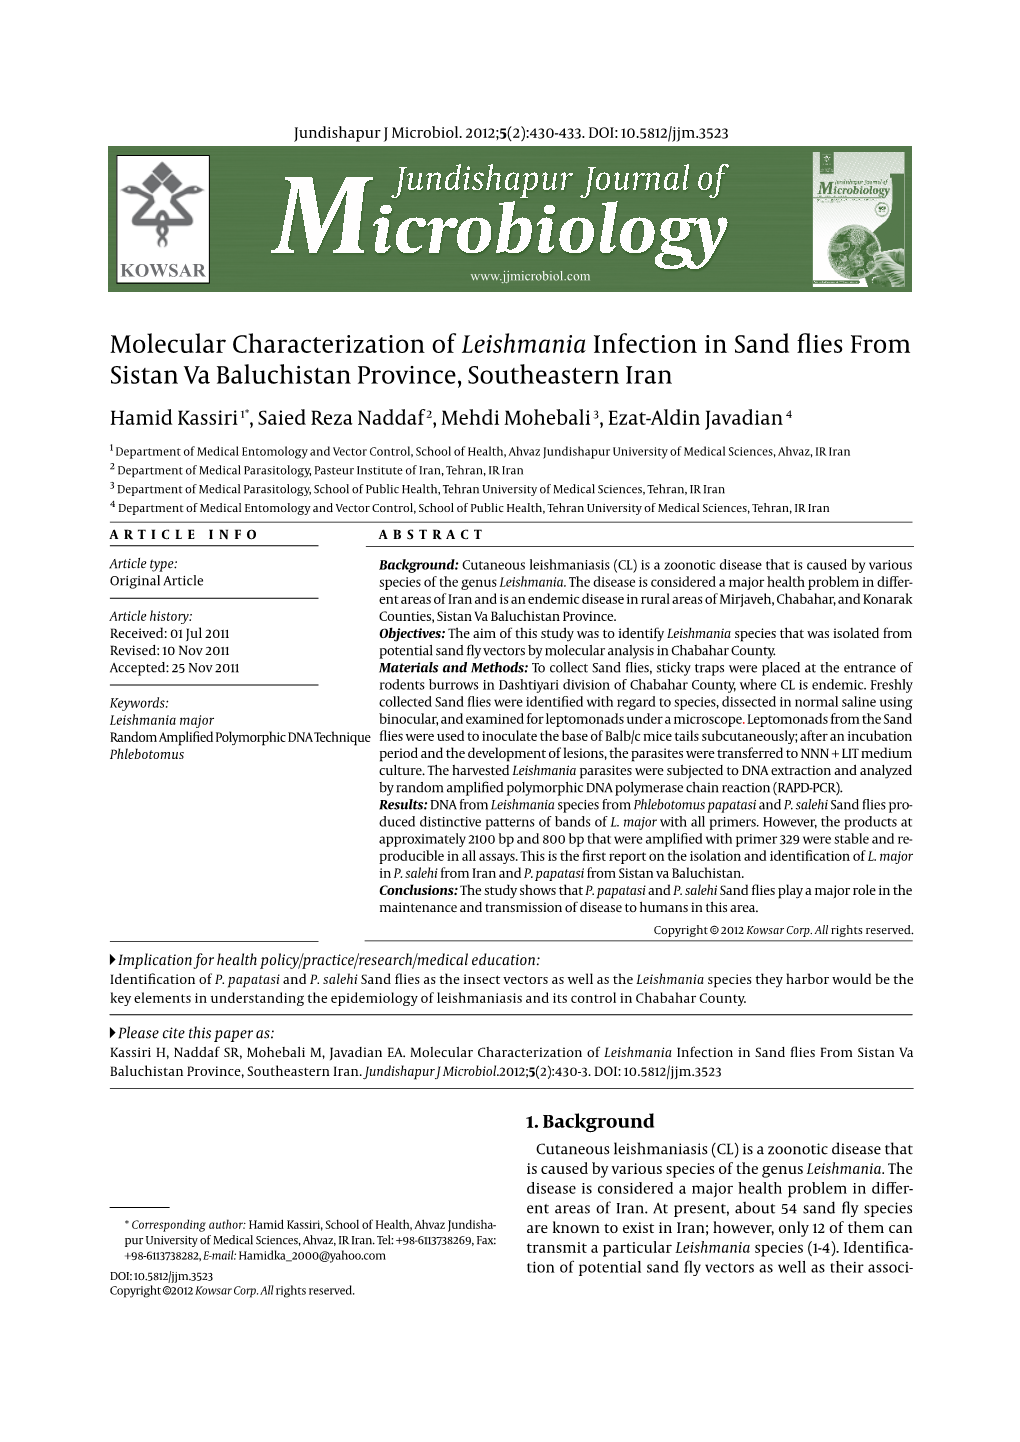 Molecular Characterization of Leishmania Infection in Sand Flies